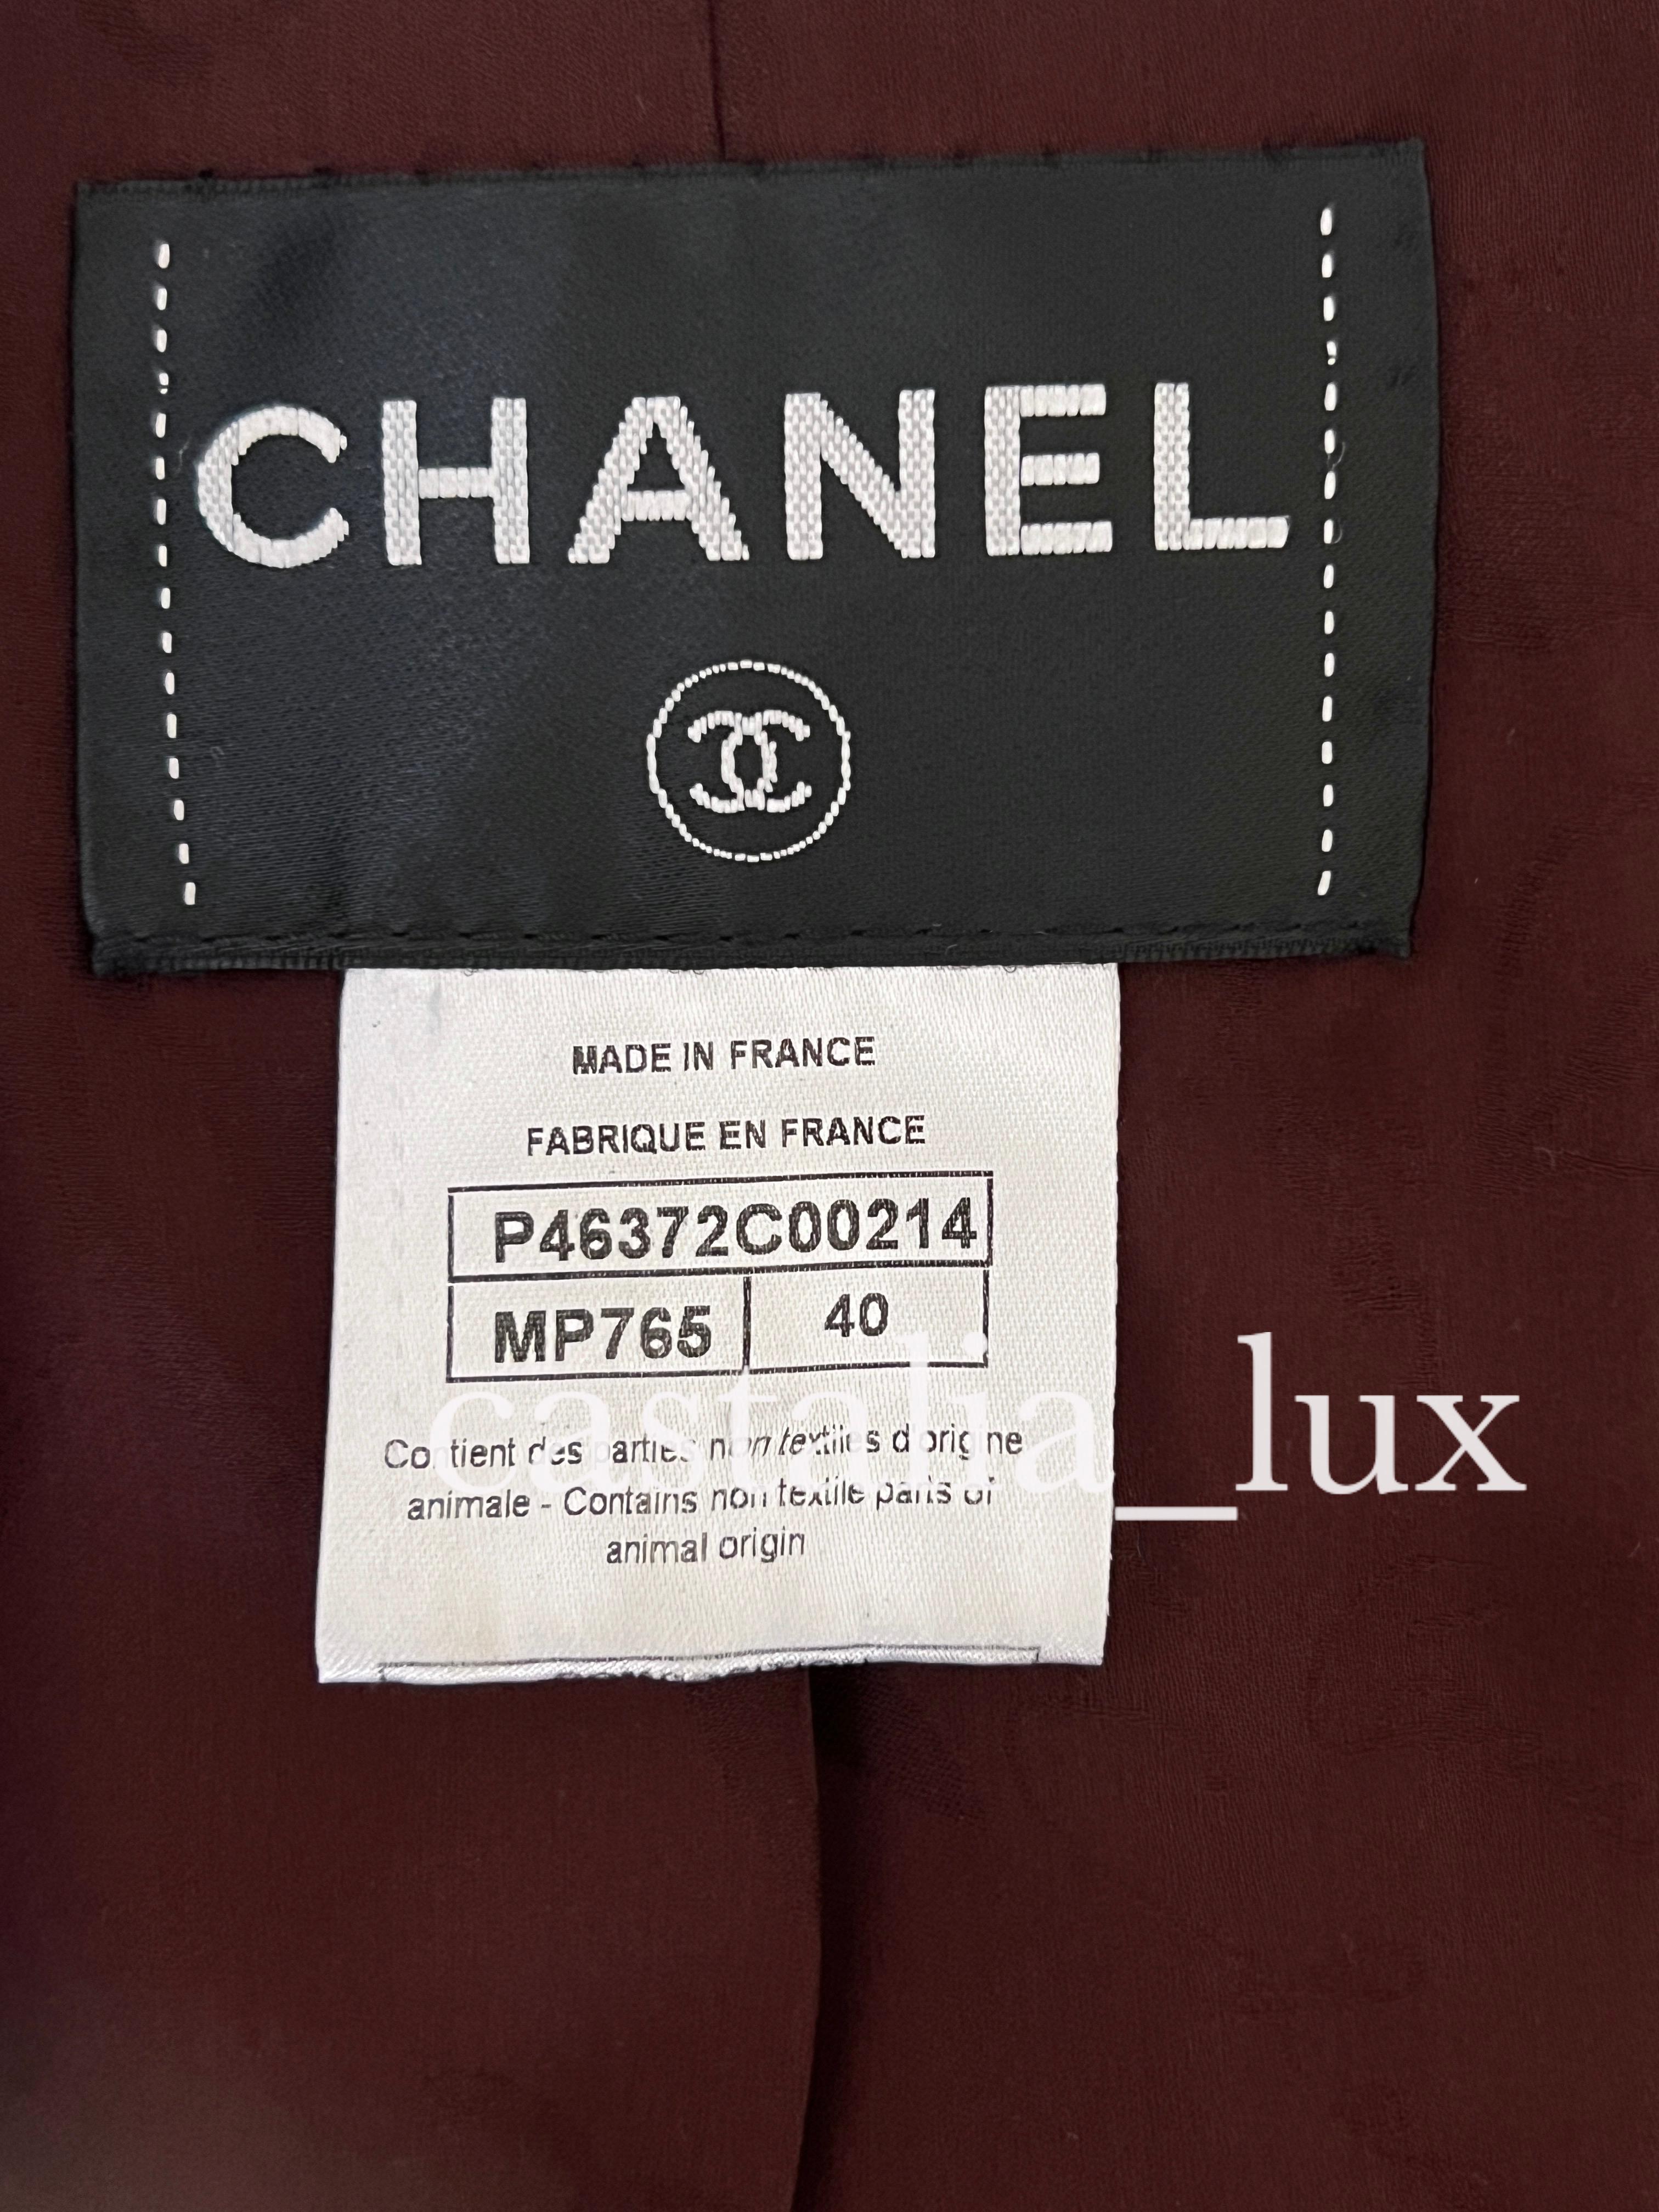 Chanel Extra Rare Paris / Edinburg Quilted Runway Jacket For Sale 11